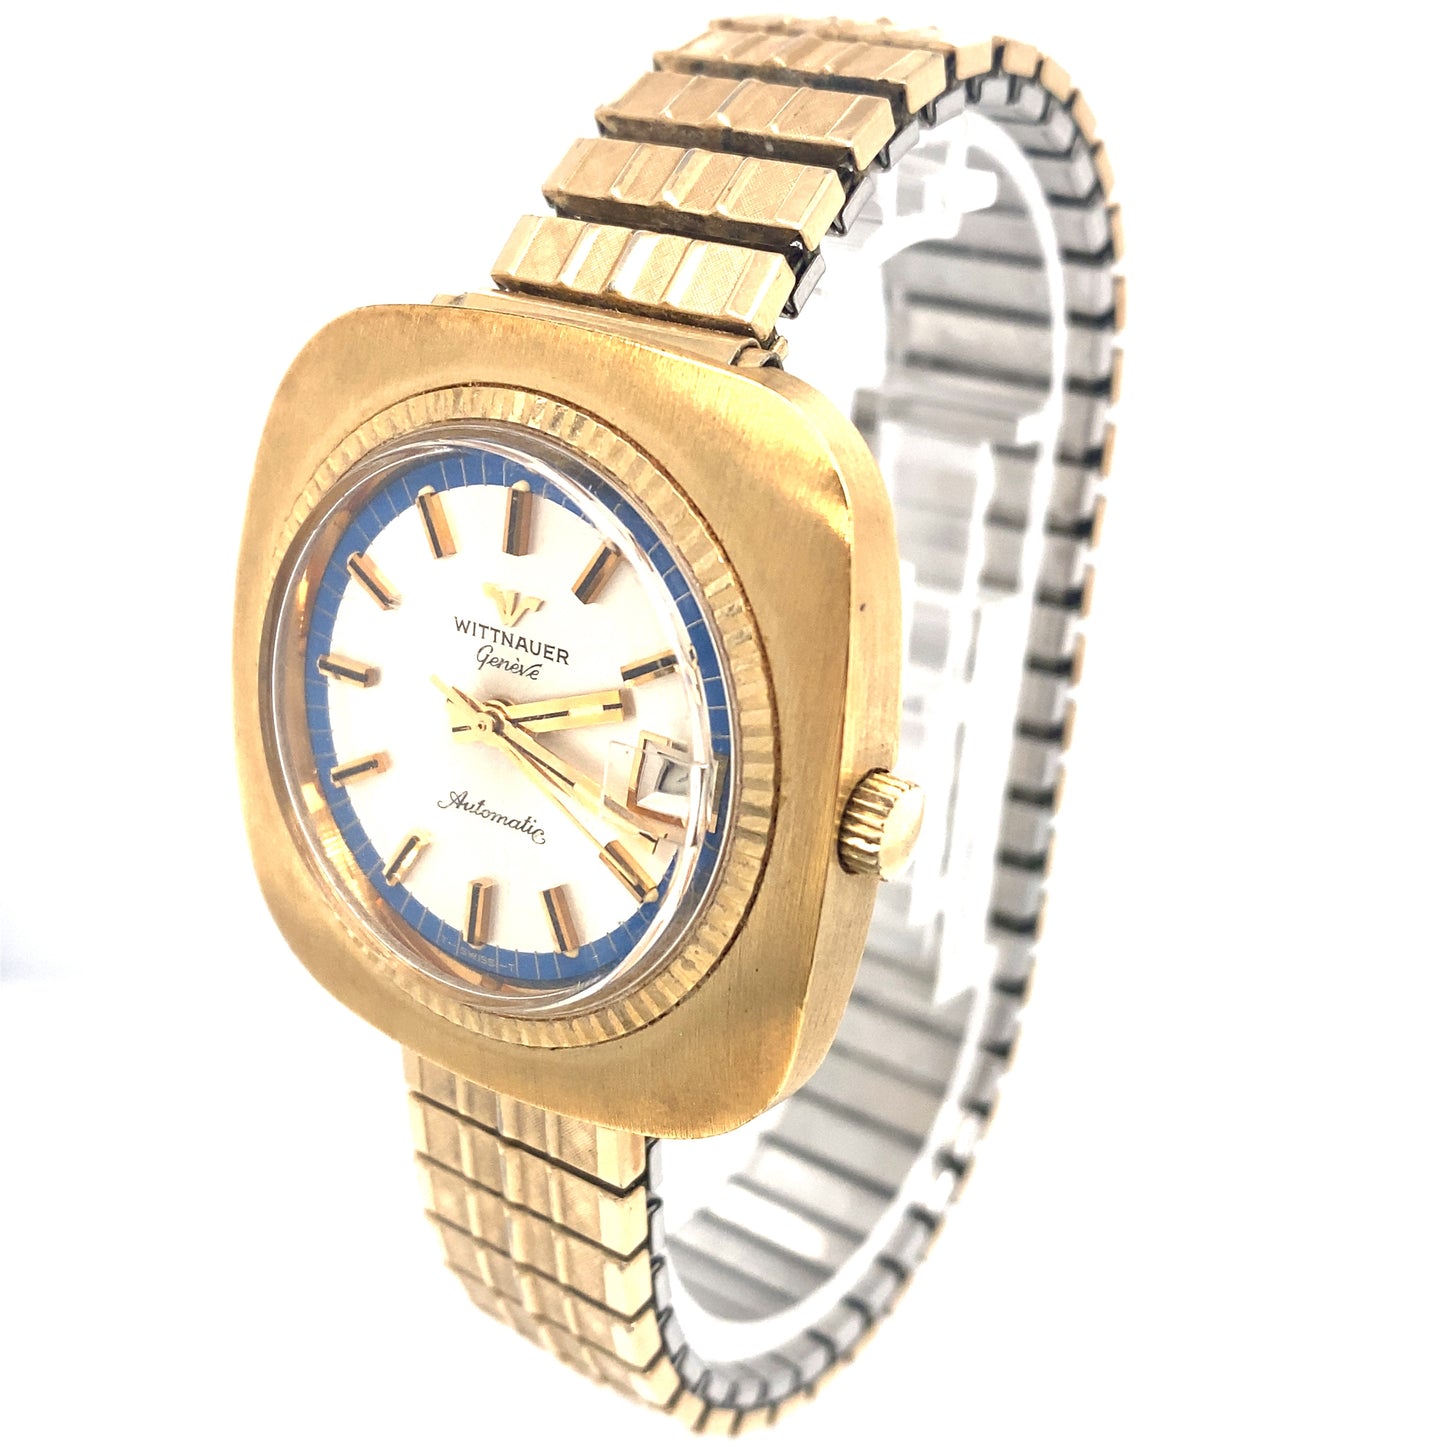 Wittnauer Wrist Watch with Elastic Bracelet in Stainless Steel and Gold Fill